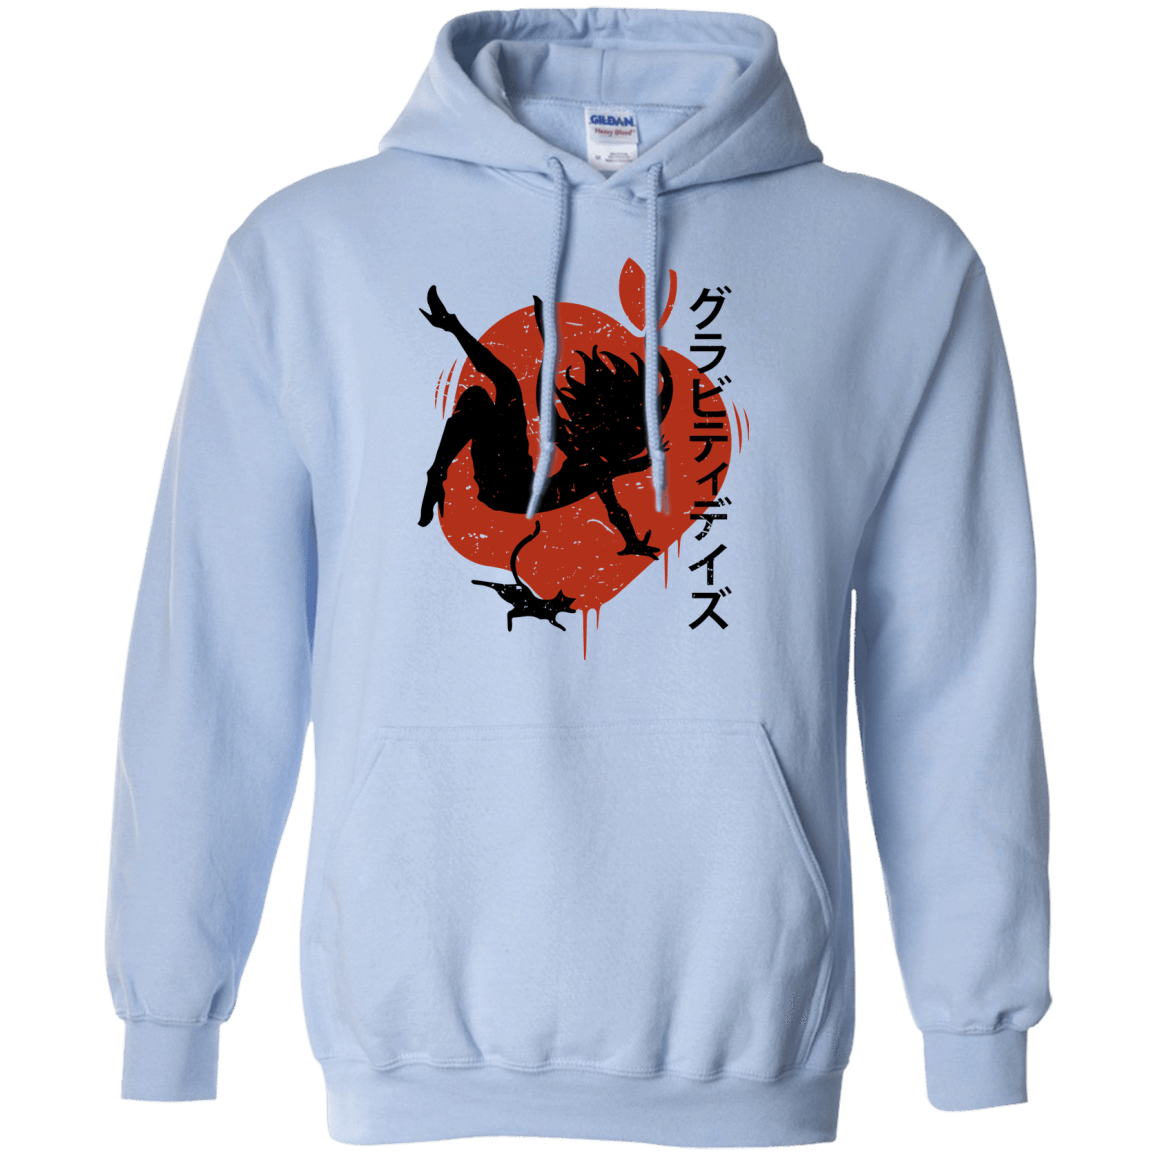 Sweatshirts Light Blue / Small Discover the Gravitation Pullover Hoodie